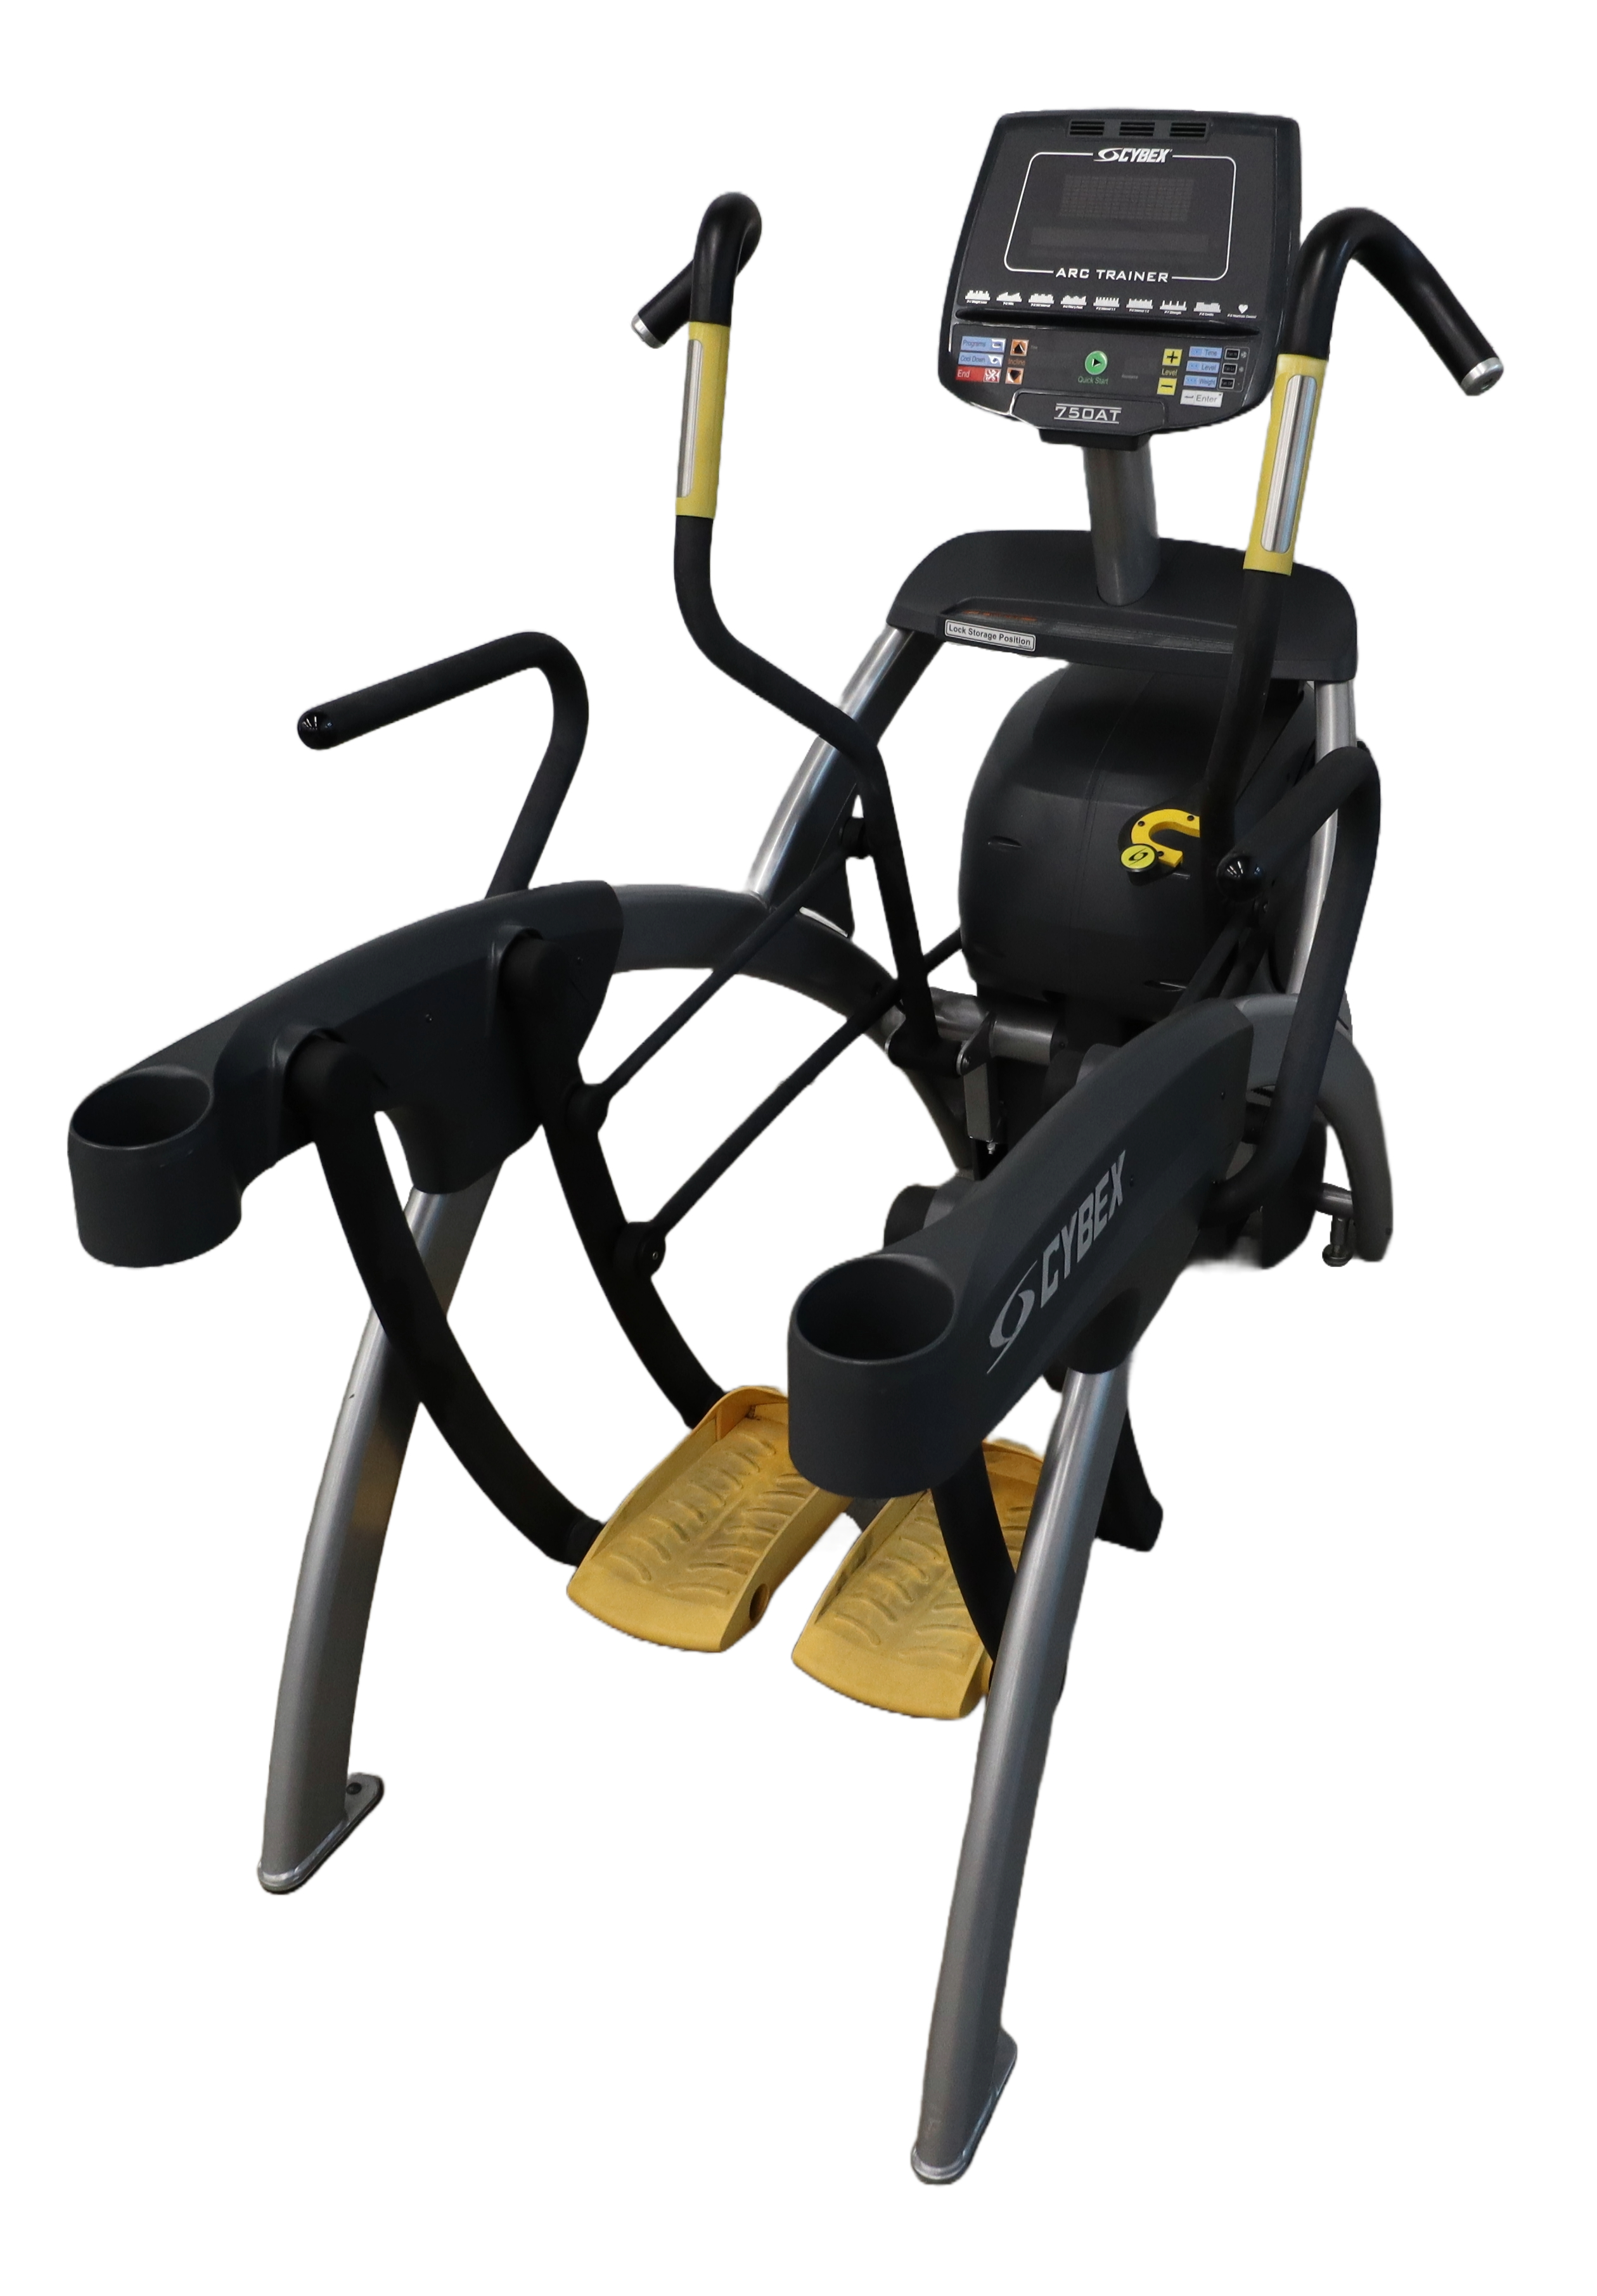 Used Cybex 750AT IFI Total Body Arc Trainer Elliptical